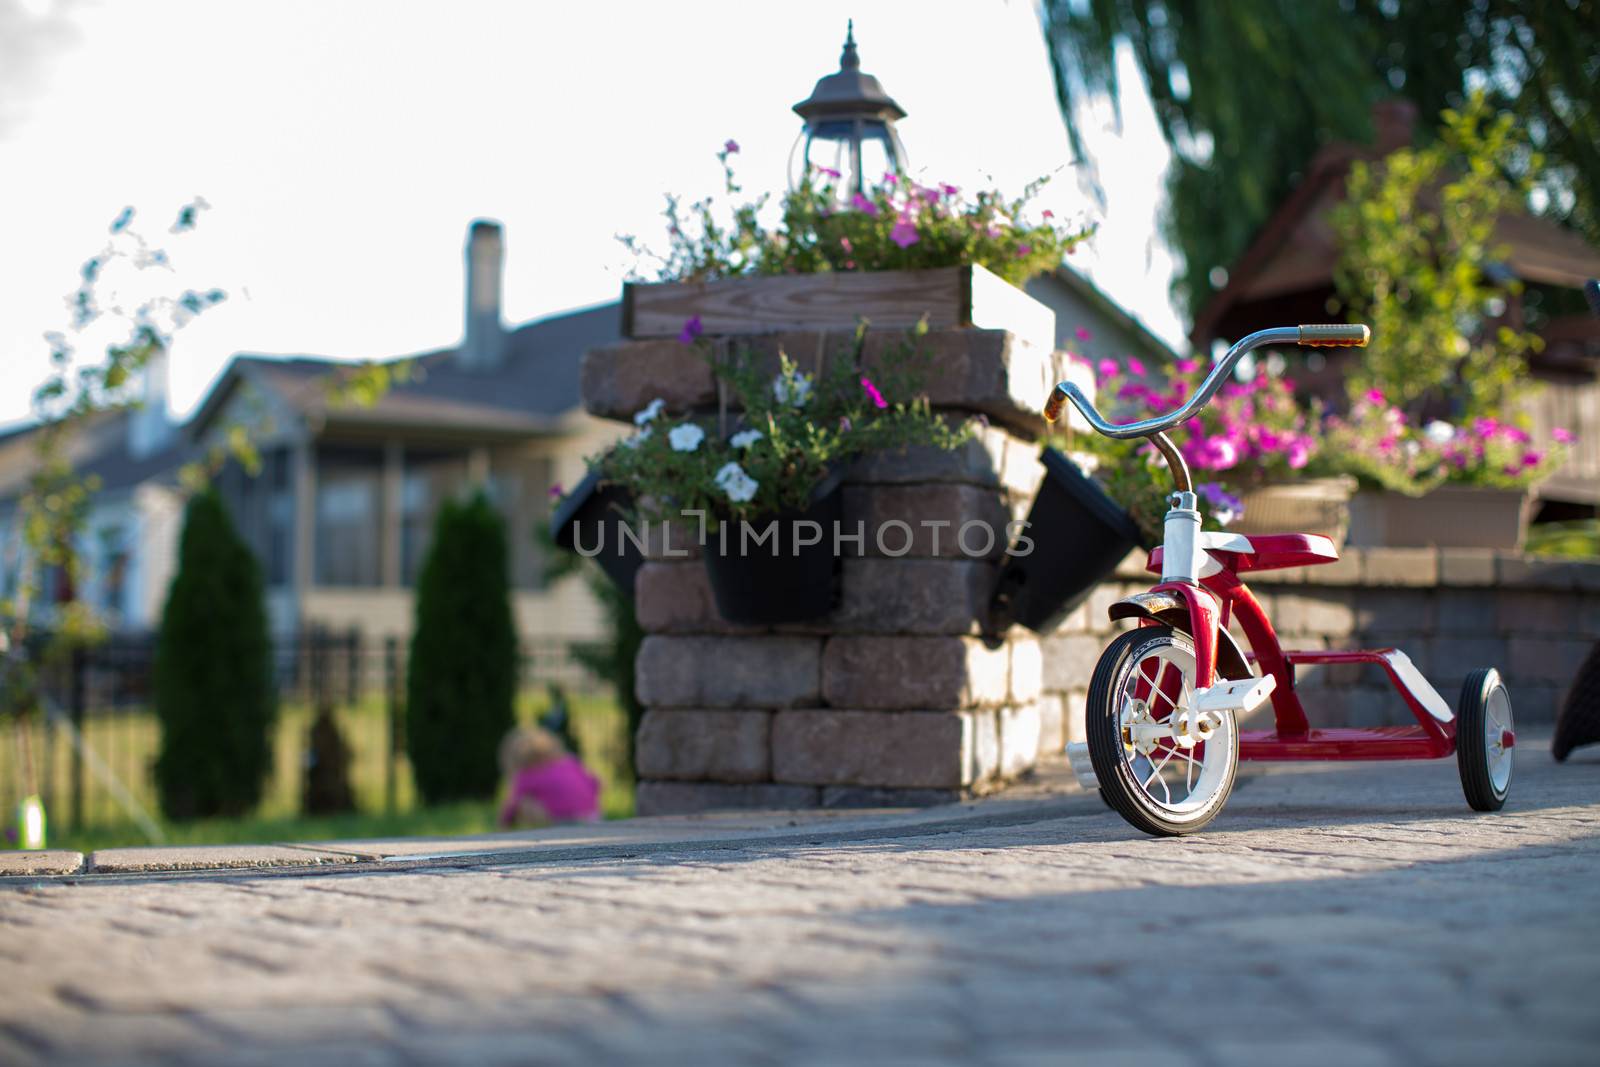 Childs red tricycle parked on a paved patio overlooking a garden in a shaft of sunlight